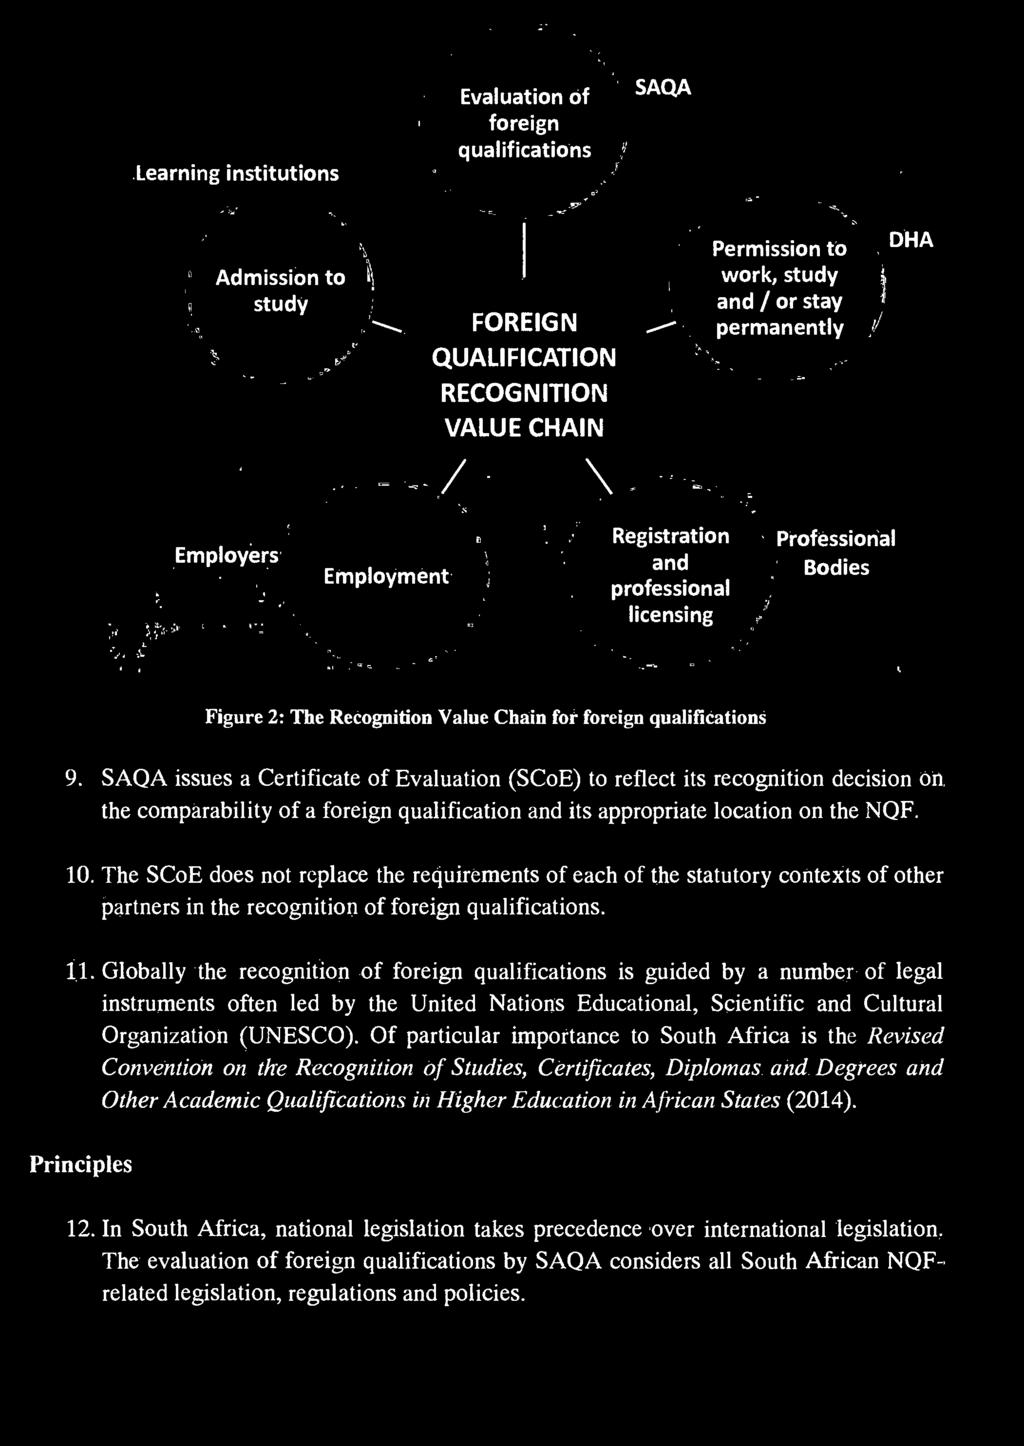 Employers Employment Registration and professional licensing Professional Bodies Figure 2: The Recognition Value Chain for foreign qualifications 9.